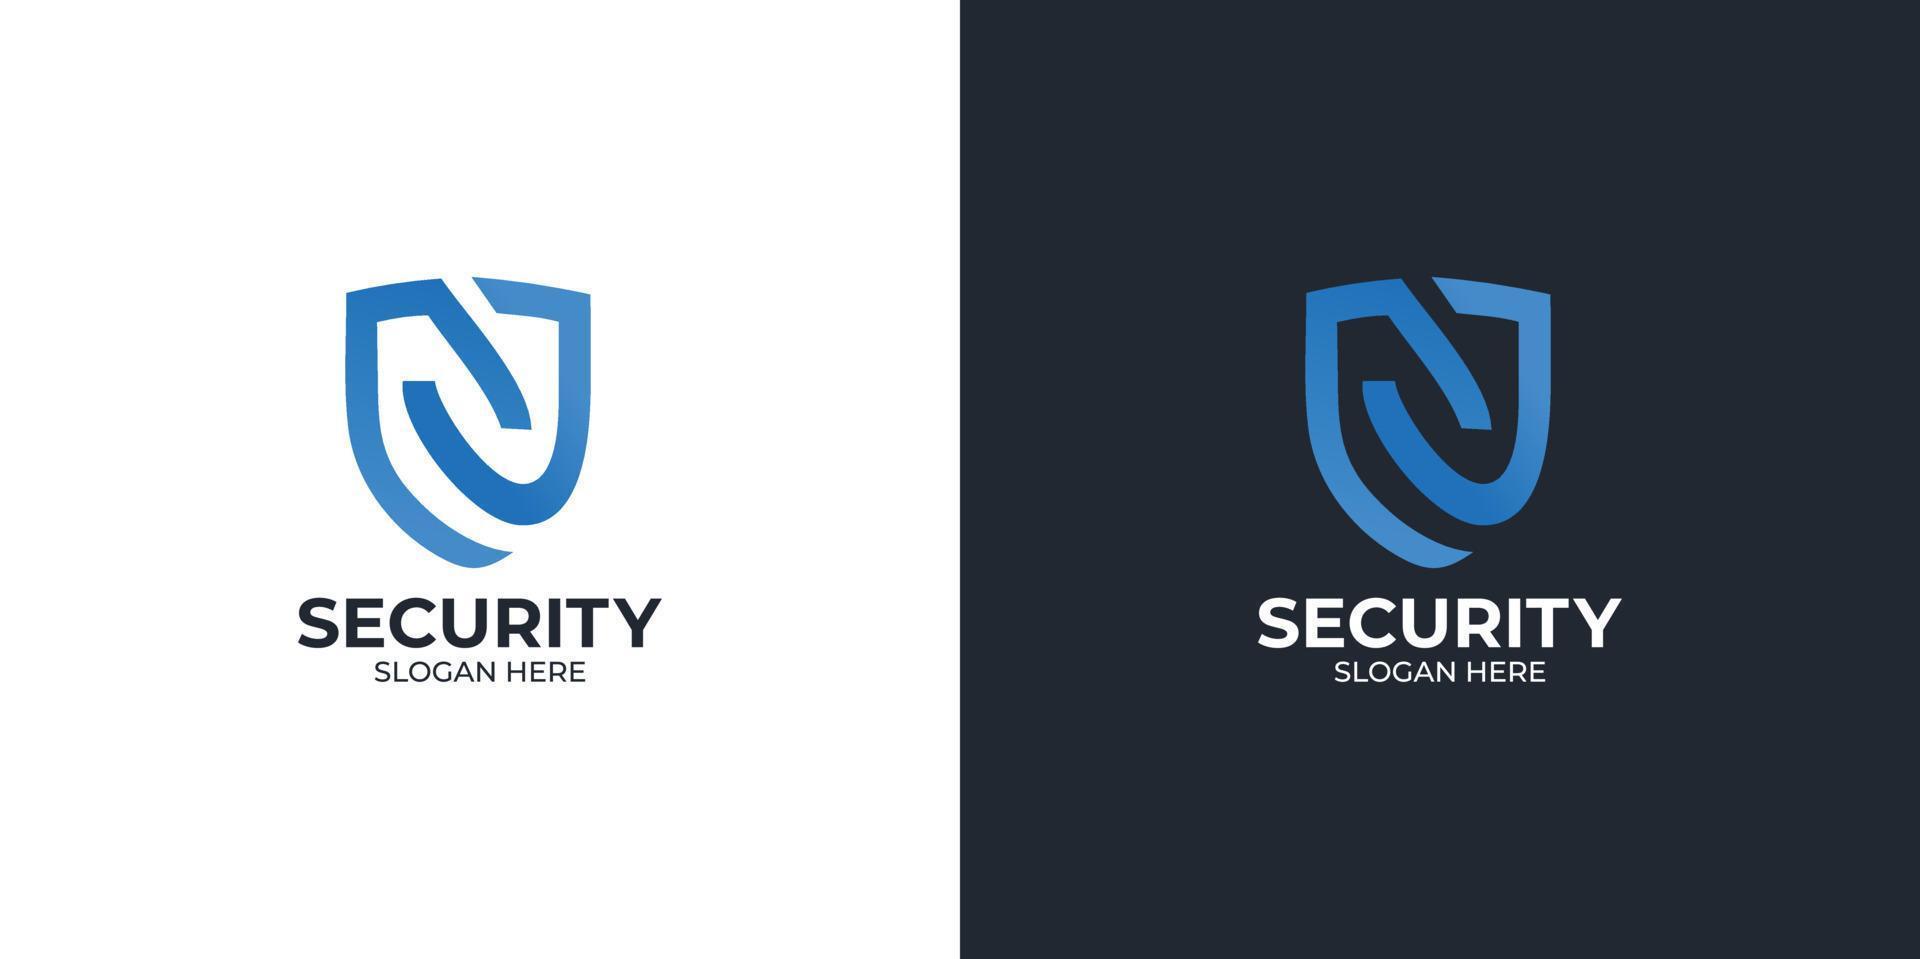 set of combination security logos with letter N vector